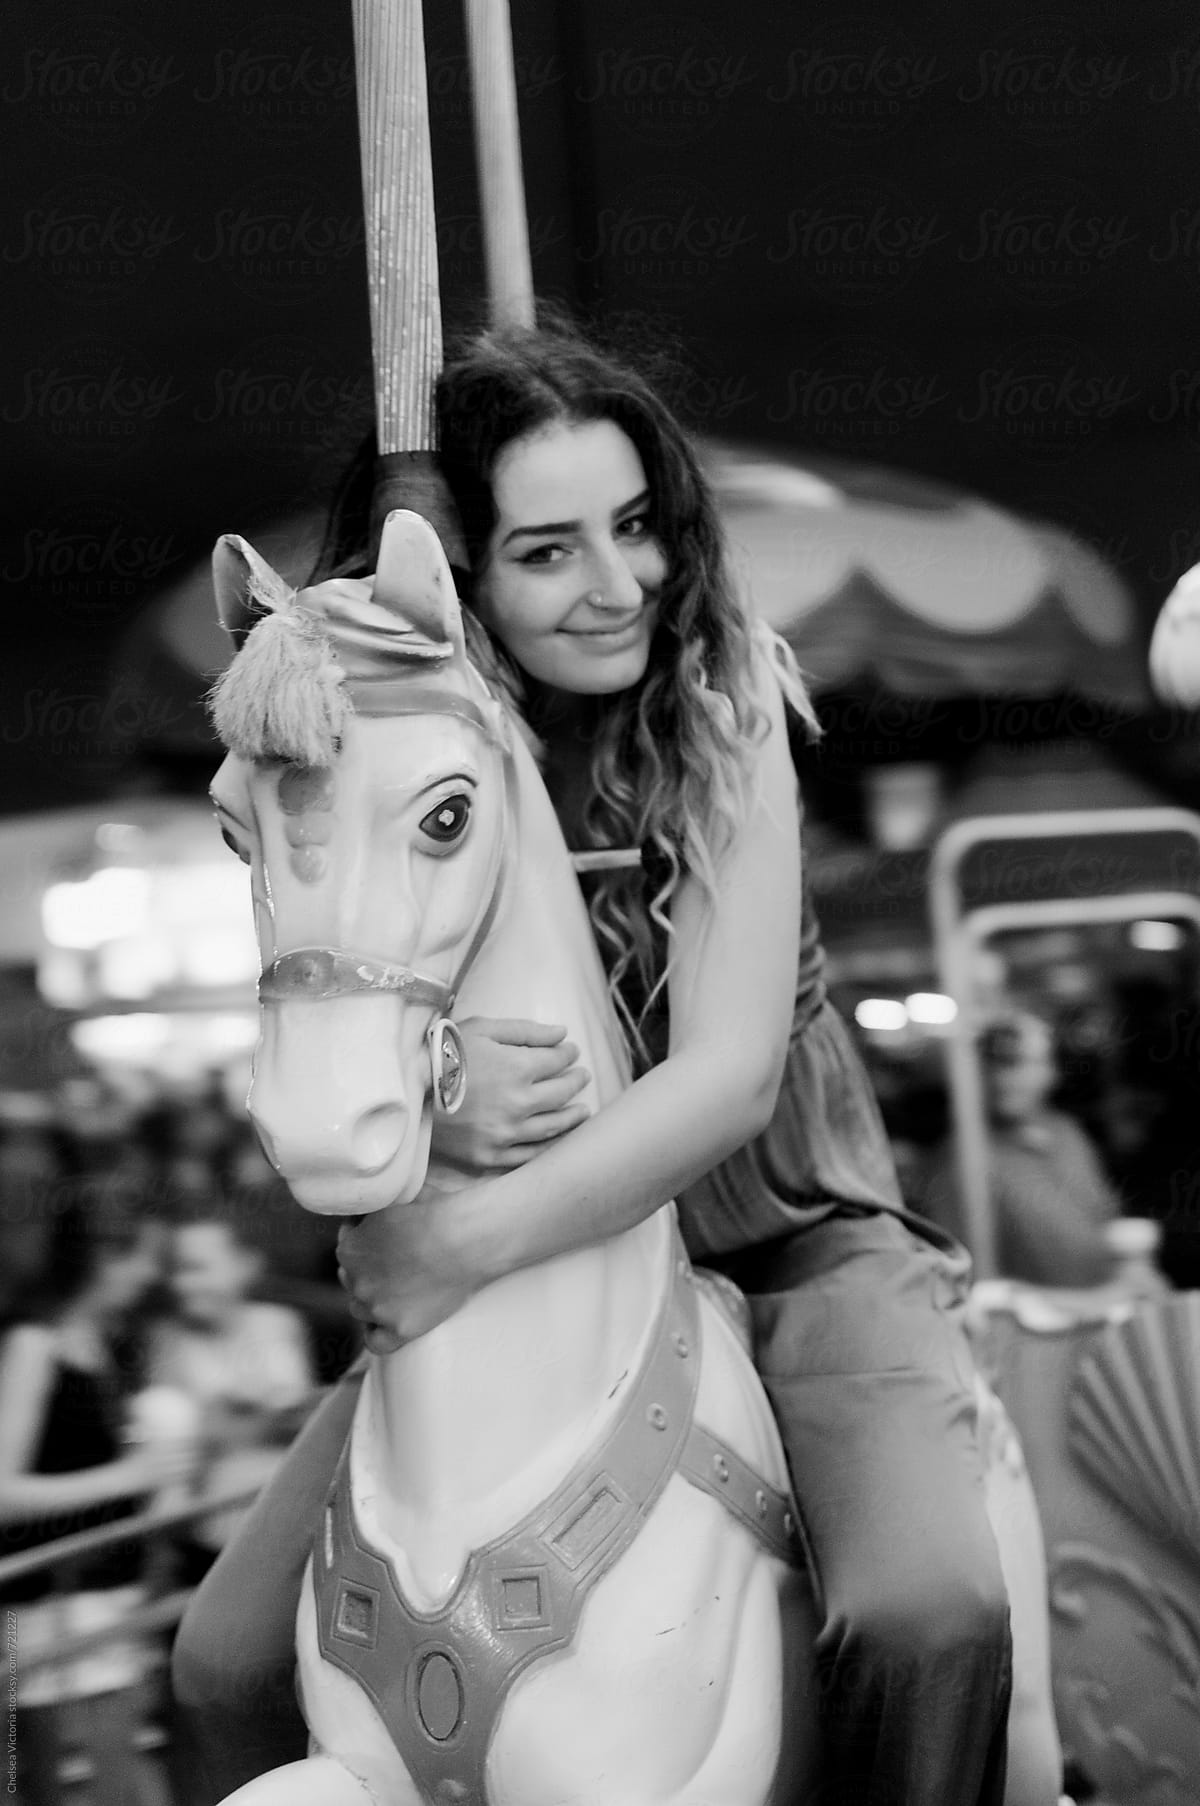 A young woman on a carousel at the carnival